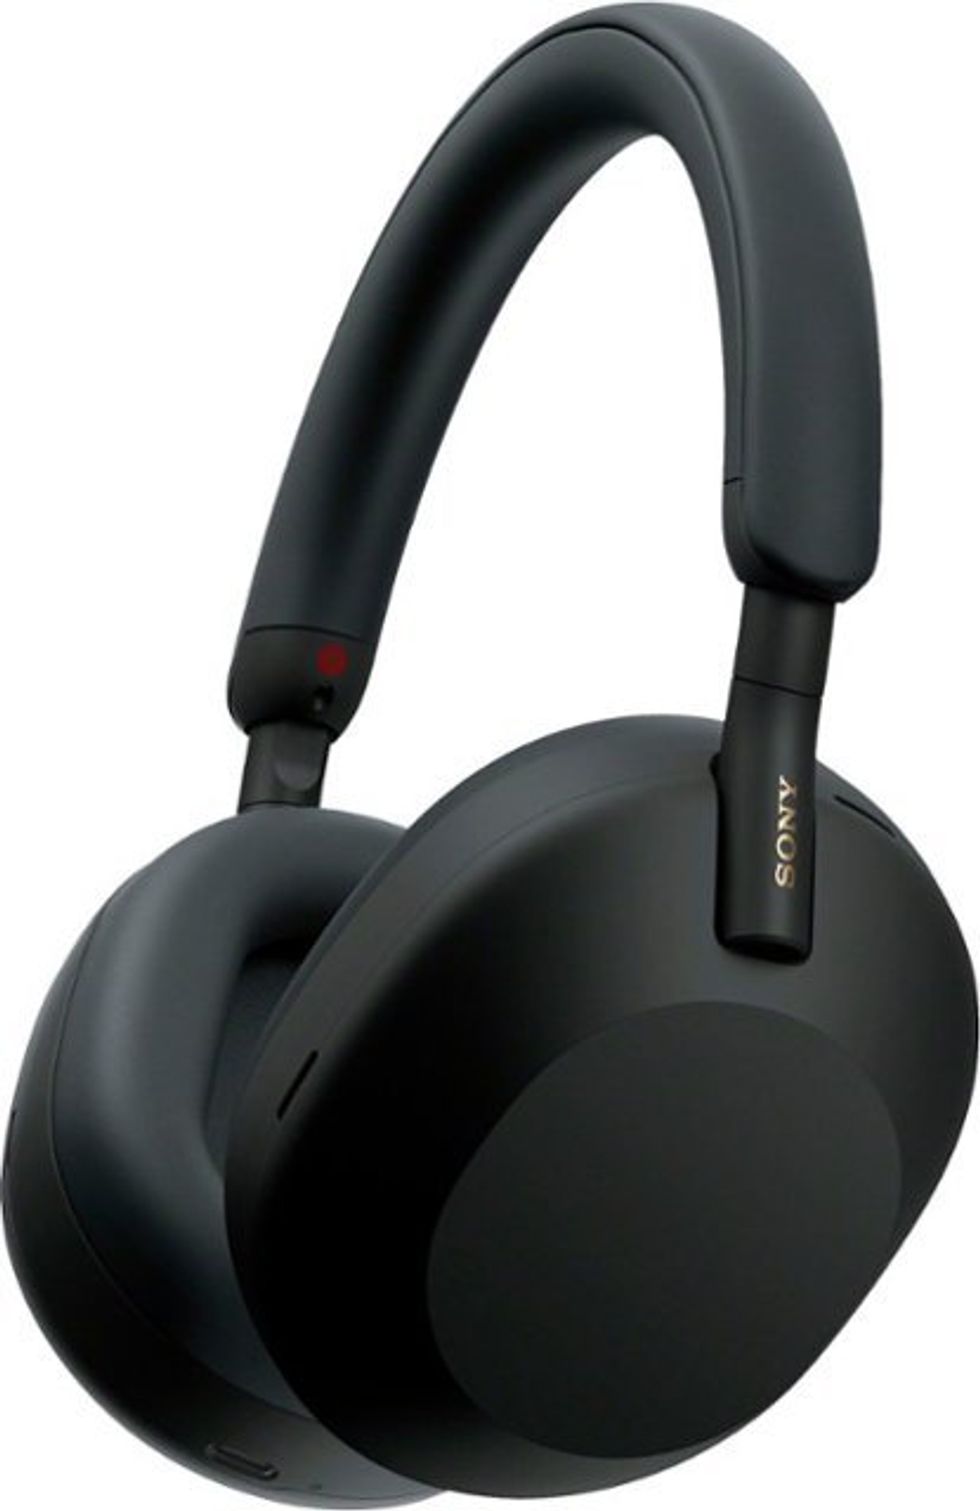 a product shot of Sony ANC headphones